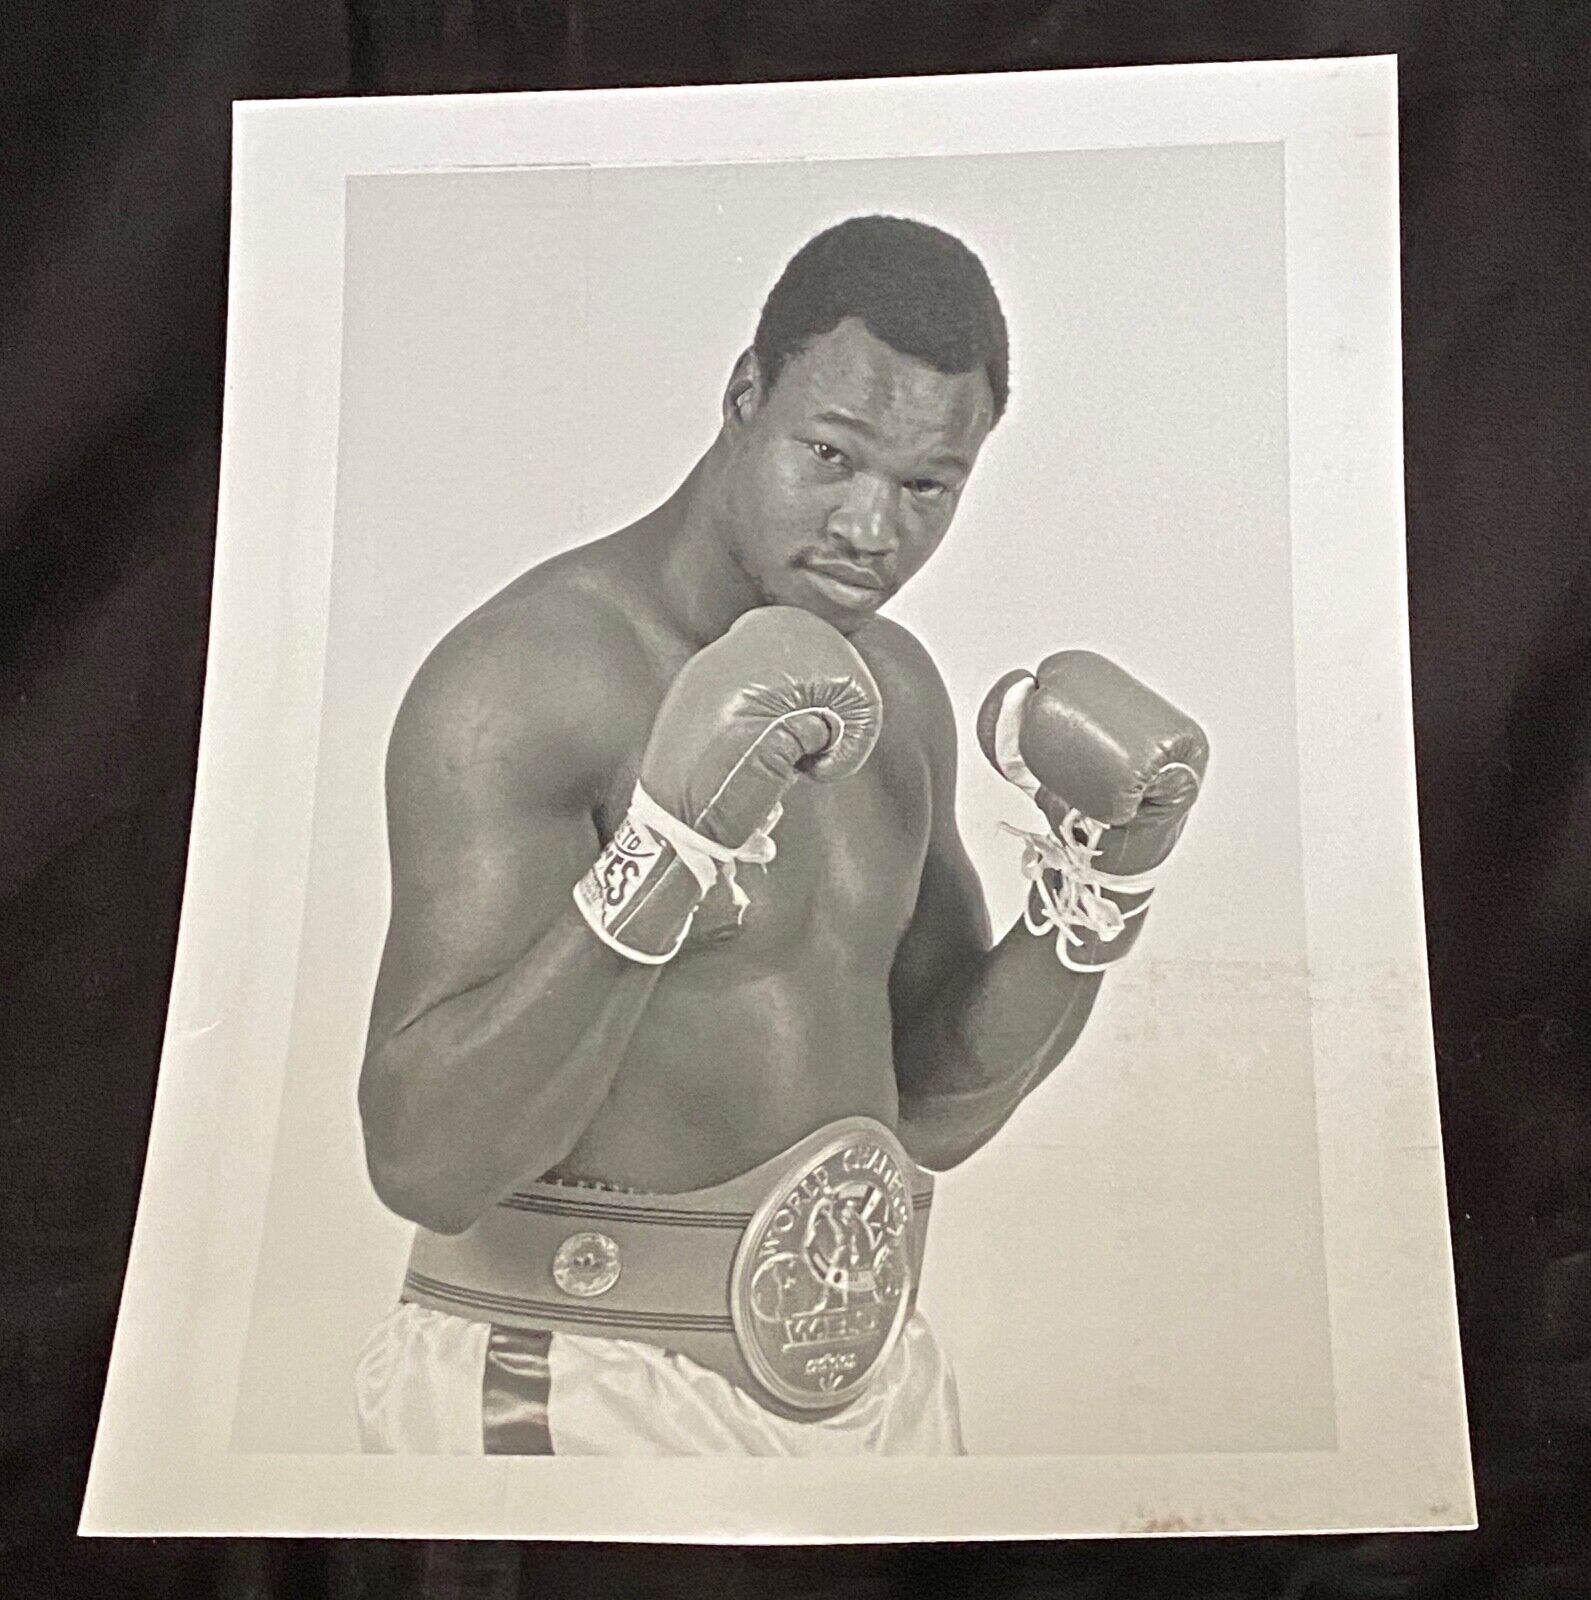 LARRY HOLMES 1982 TRAINING PHOTOS ( 8 x 10) pre WBC TITLE BOUT with GERRY COONEY Don King Productions - фотография #5